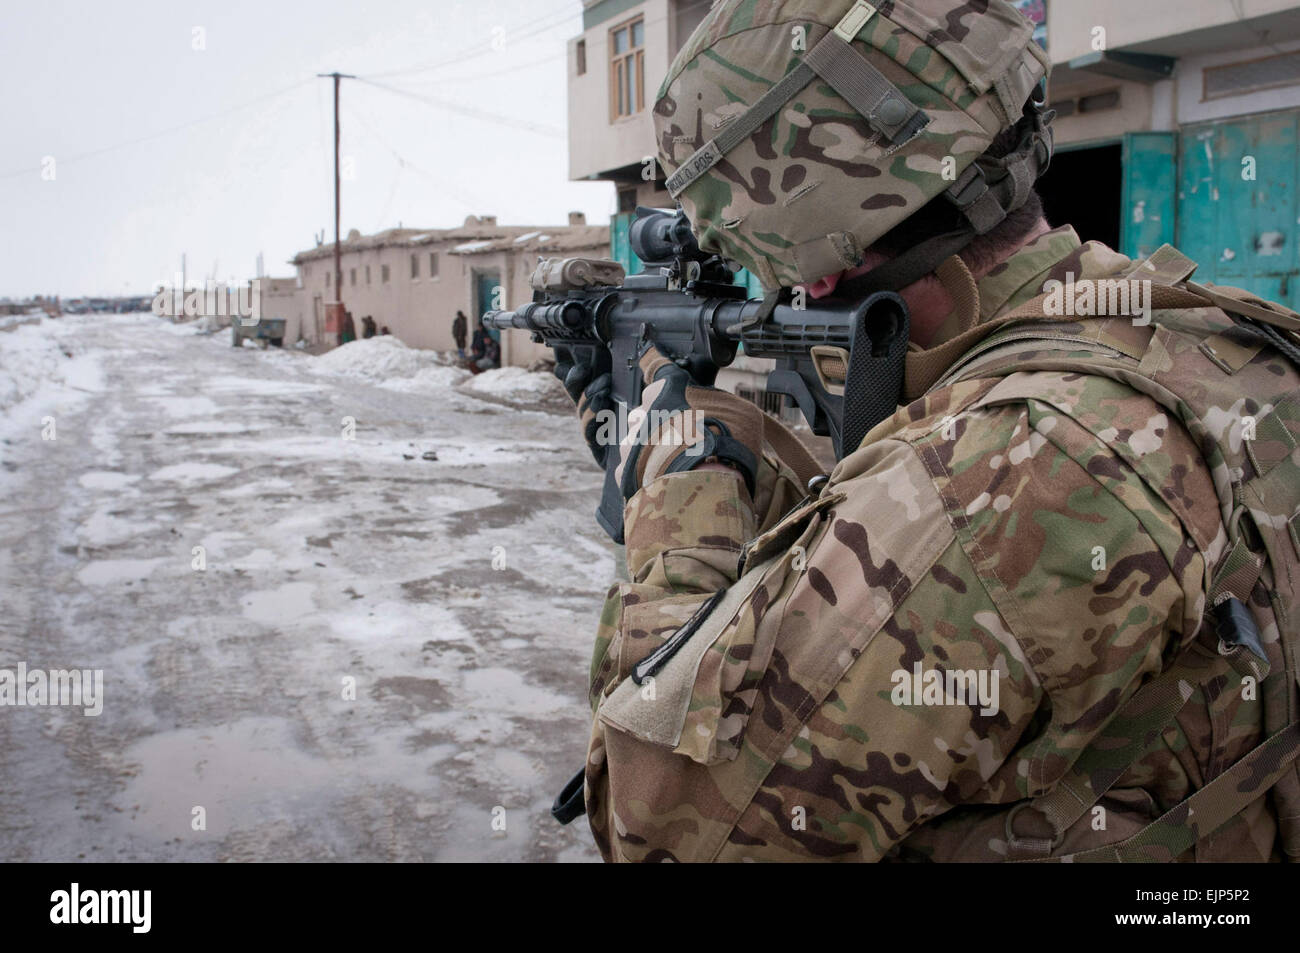 U.S. Army Staff Sgt. Tom Maahs, from Maple Shade, N.J., who is with the Task Force Paladin explosive ordinance disposal unit, inspects the site of an IED through his rifle scope on a street near the wood market in Gardez, Feb. 18. The IED was discovered by local Afghan Uniformed Police and later destroyed by an Afghan National Army explosive ordinance disposal unit. Stock Photo